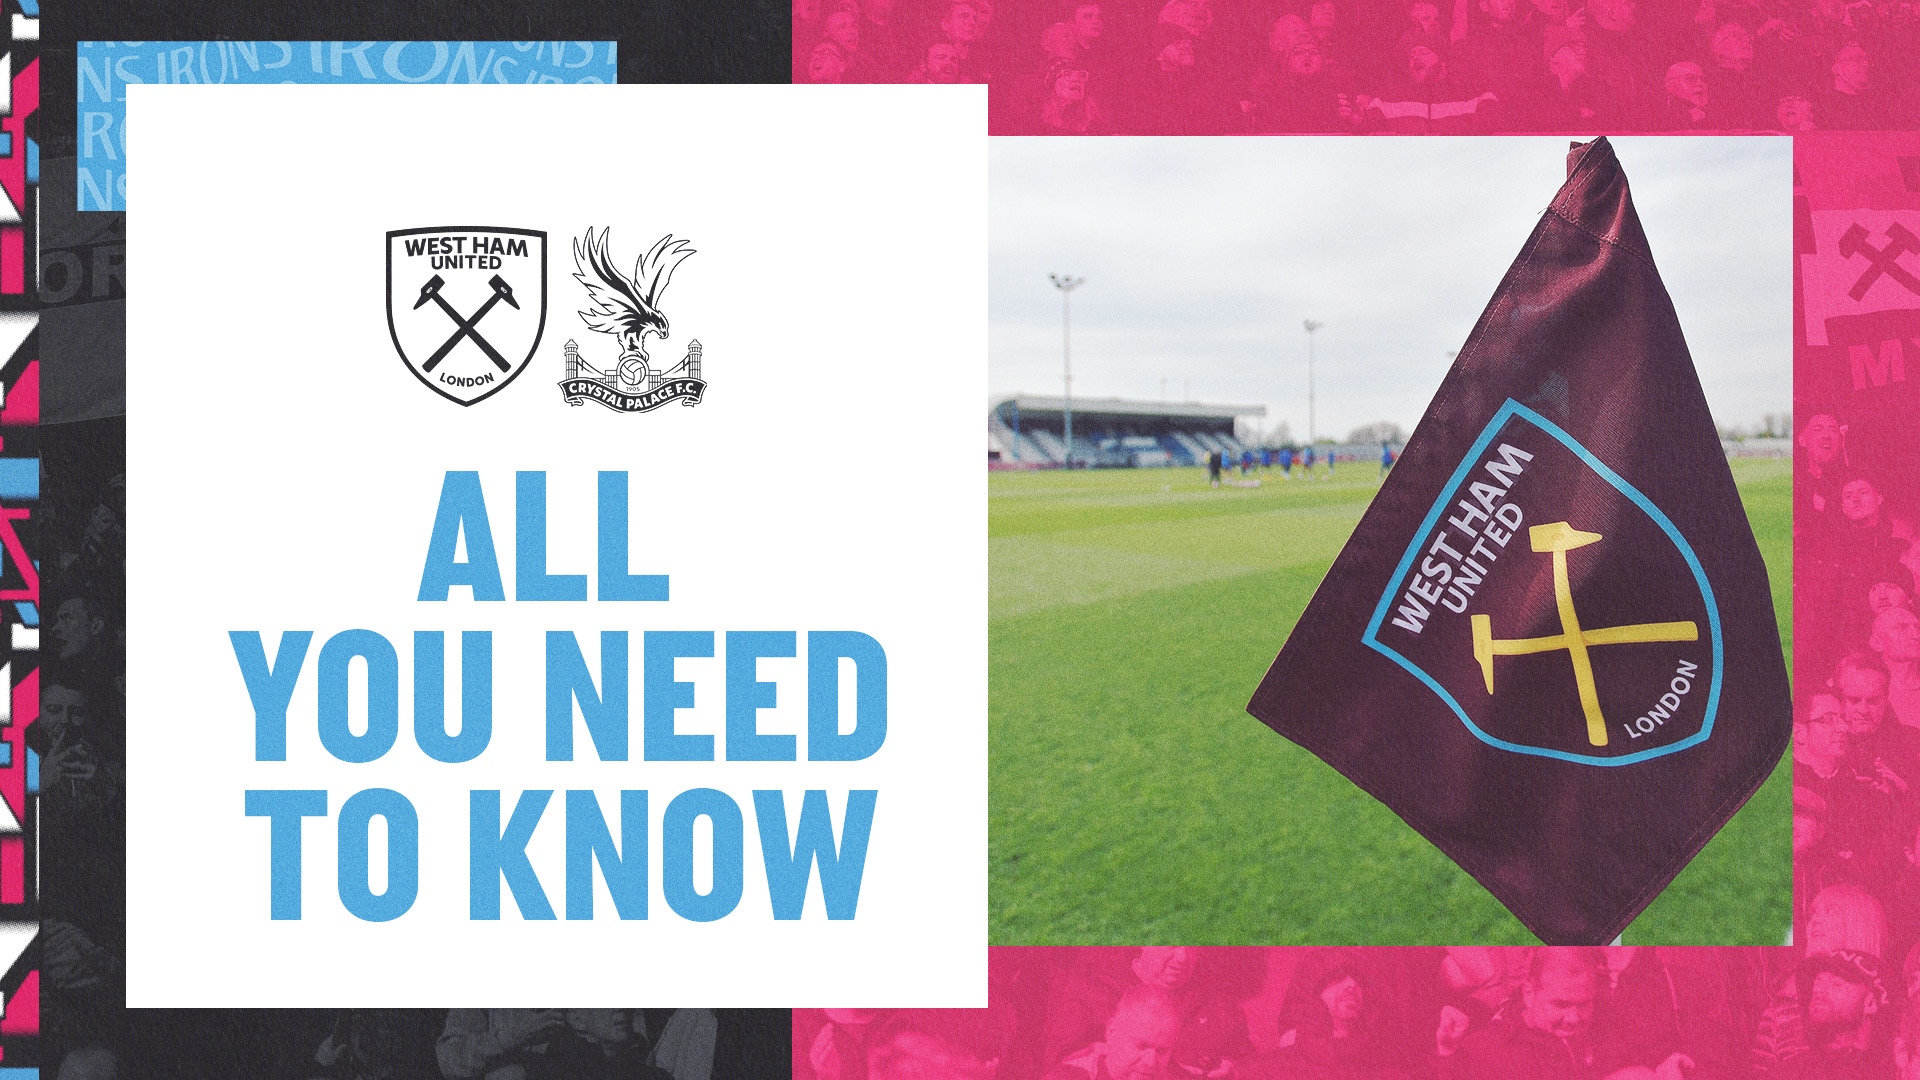 West Ham United U21s v Crystal Palace - All You Need To Know